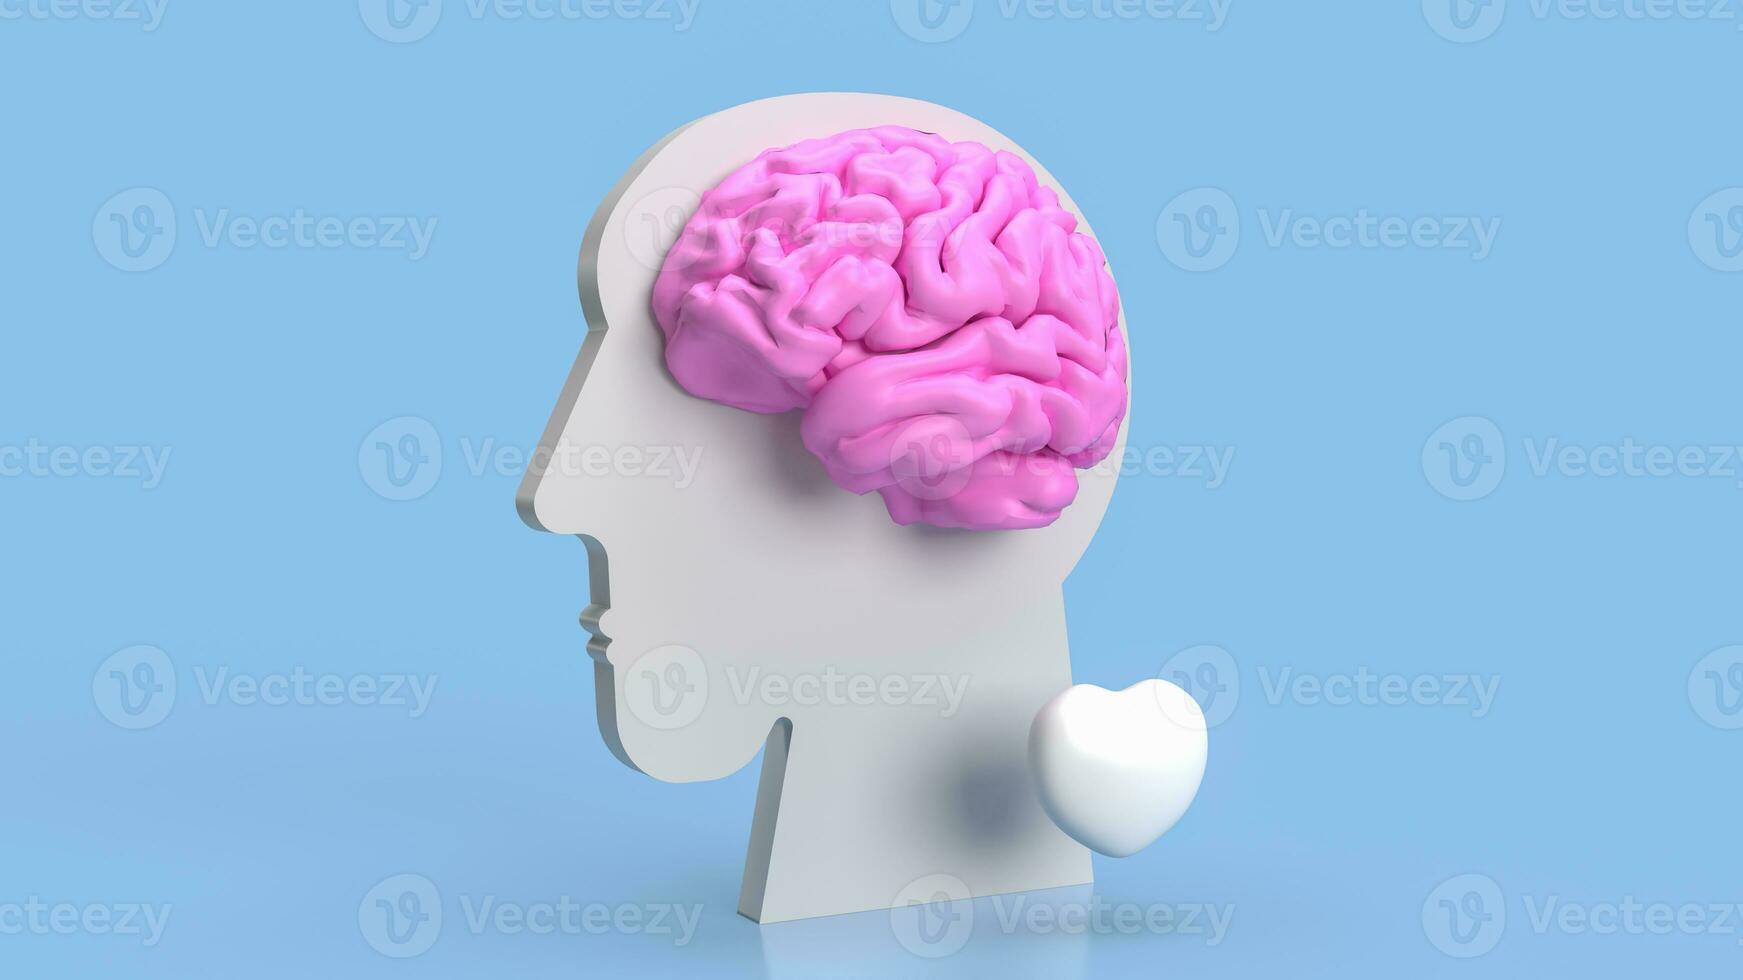 The bust head and brain for sci or medical concept 3d rendering photo